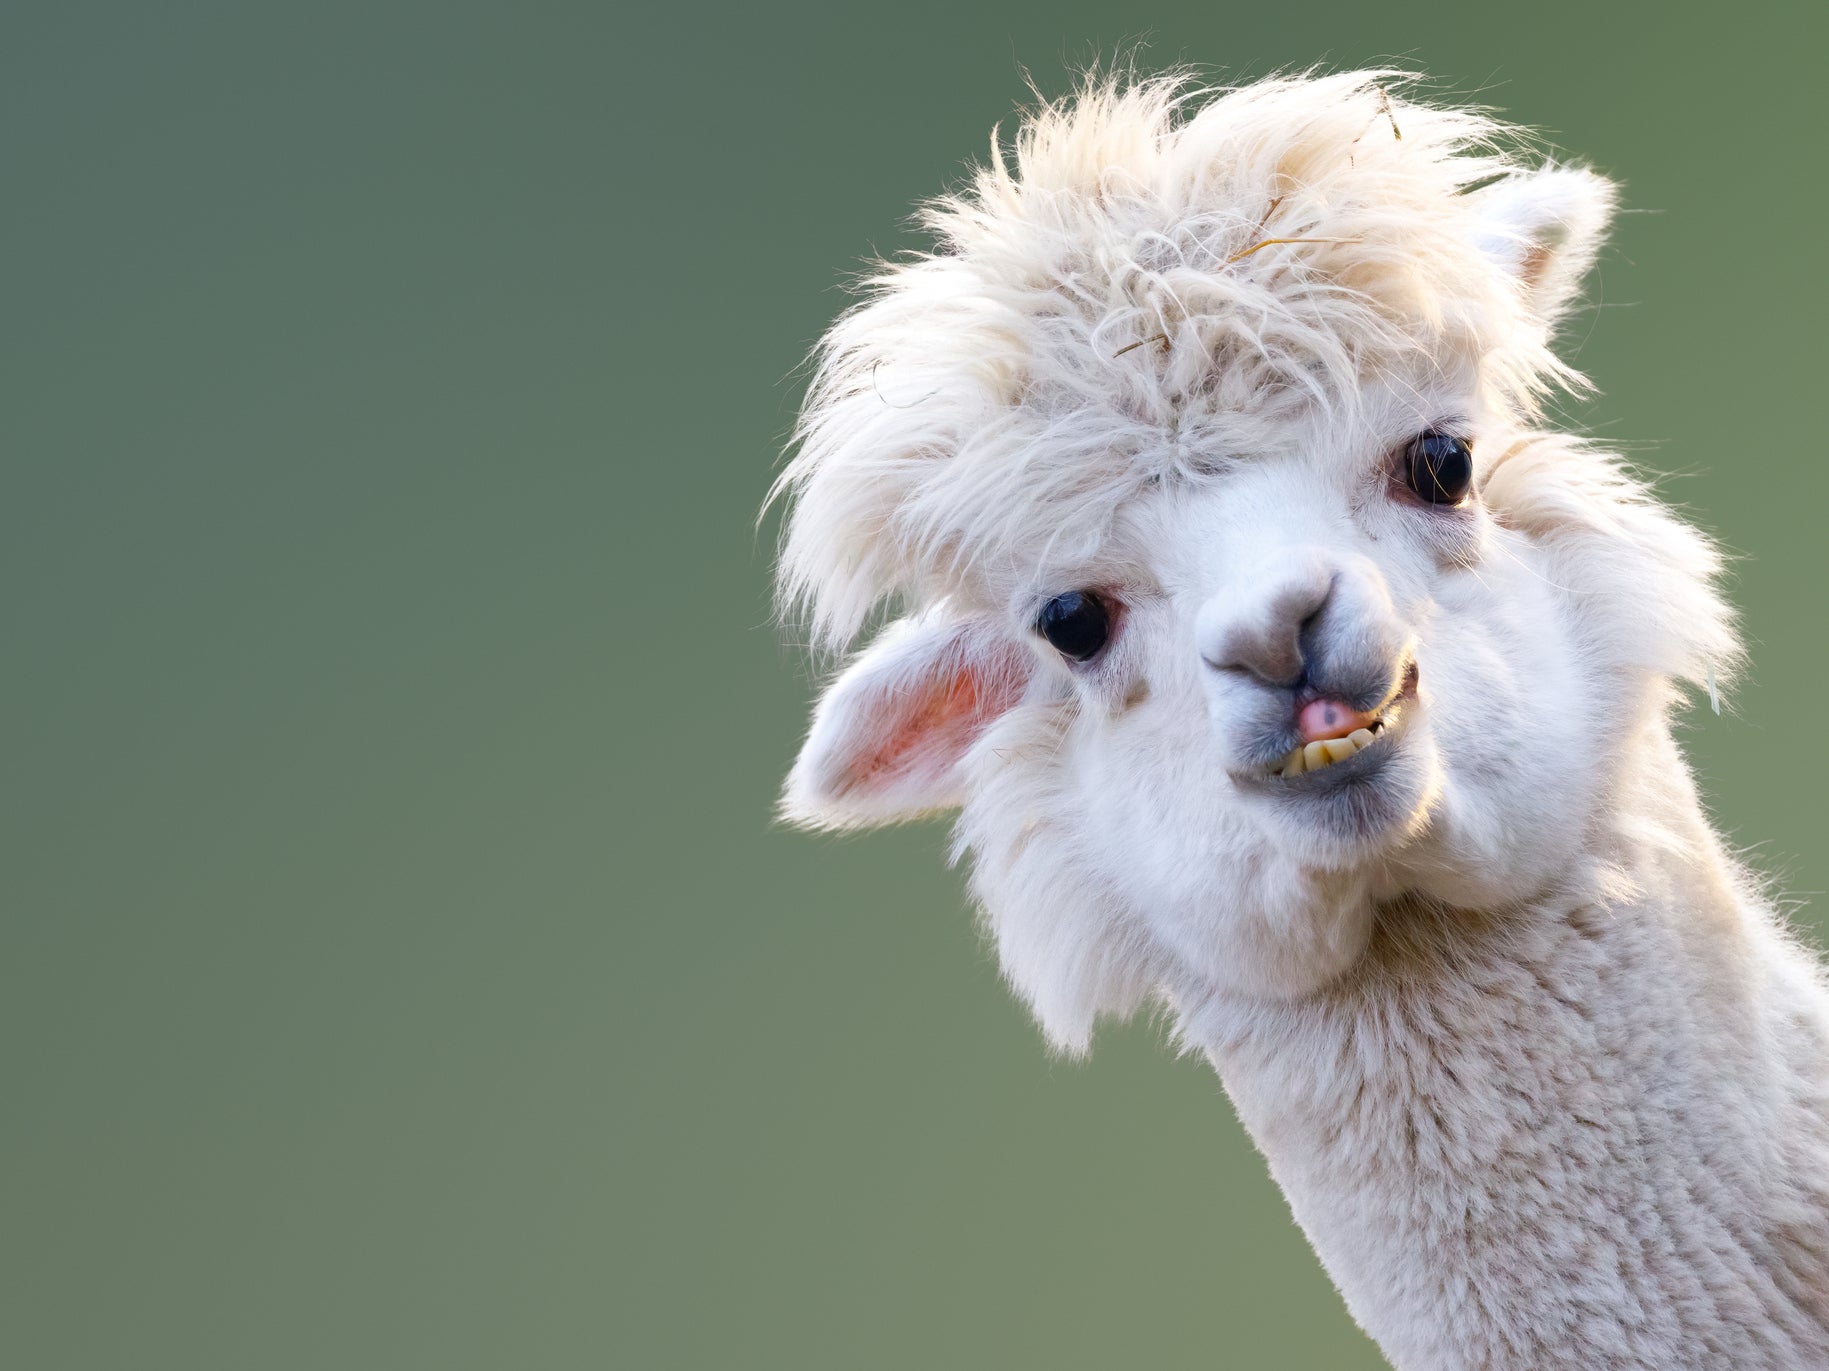 An alpaca named Tyson showed a strong immune response against infection with the virus which causes Covid-19